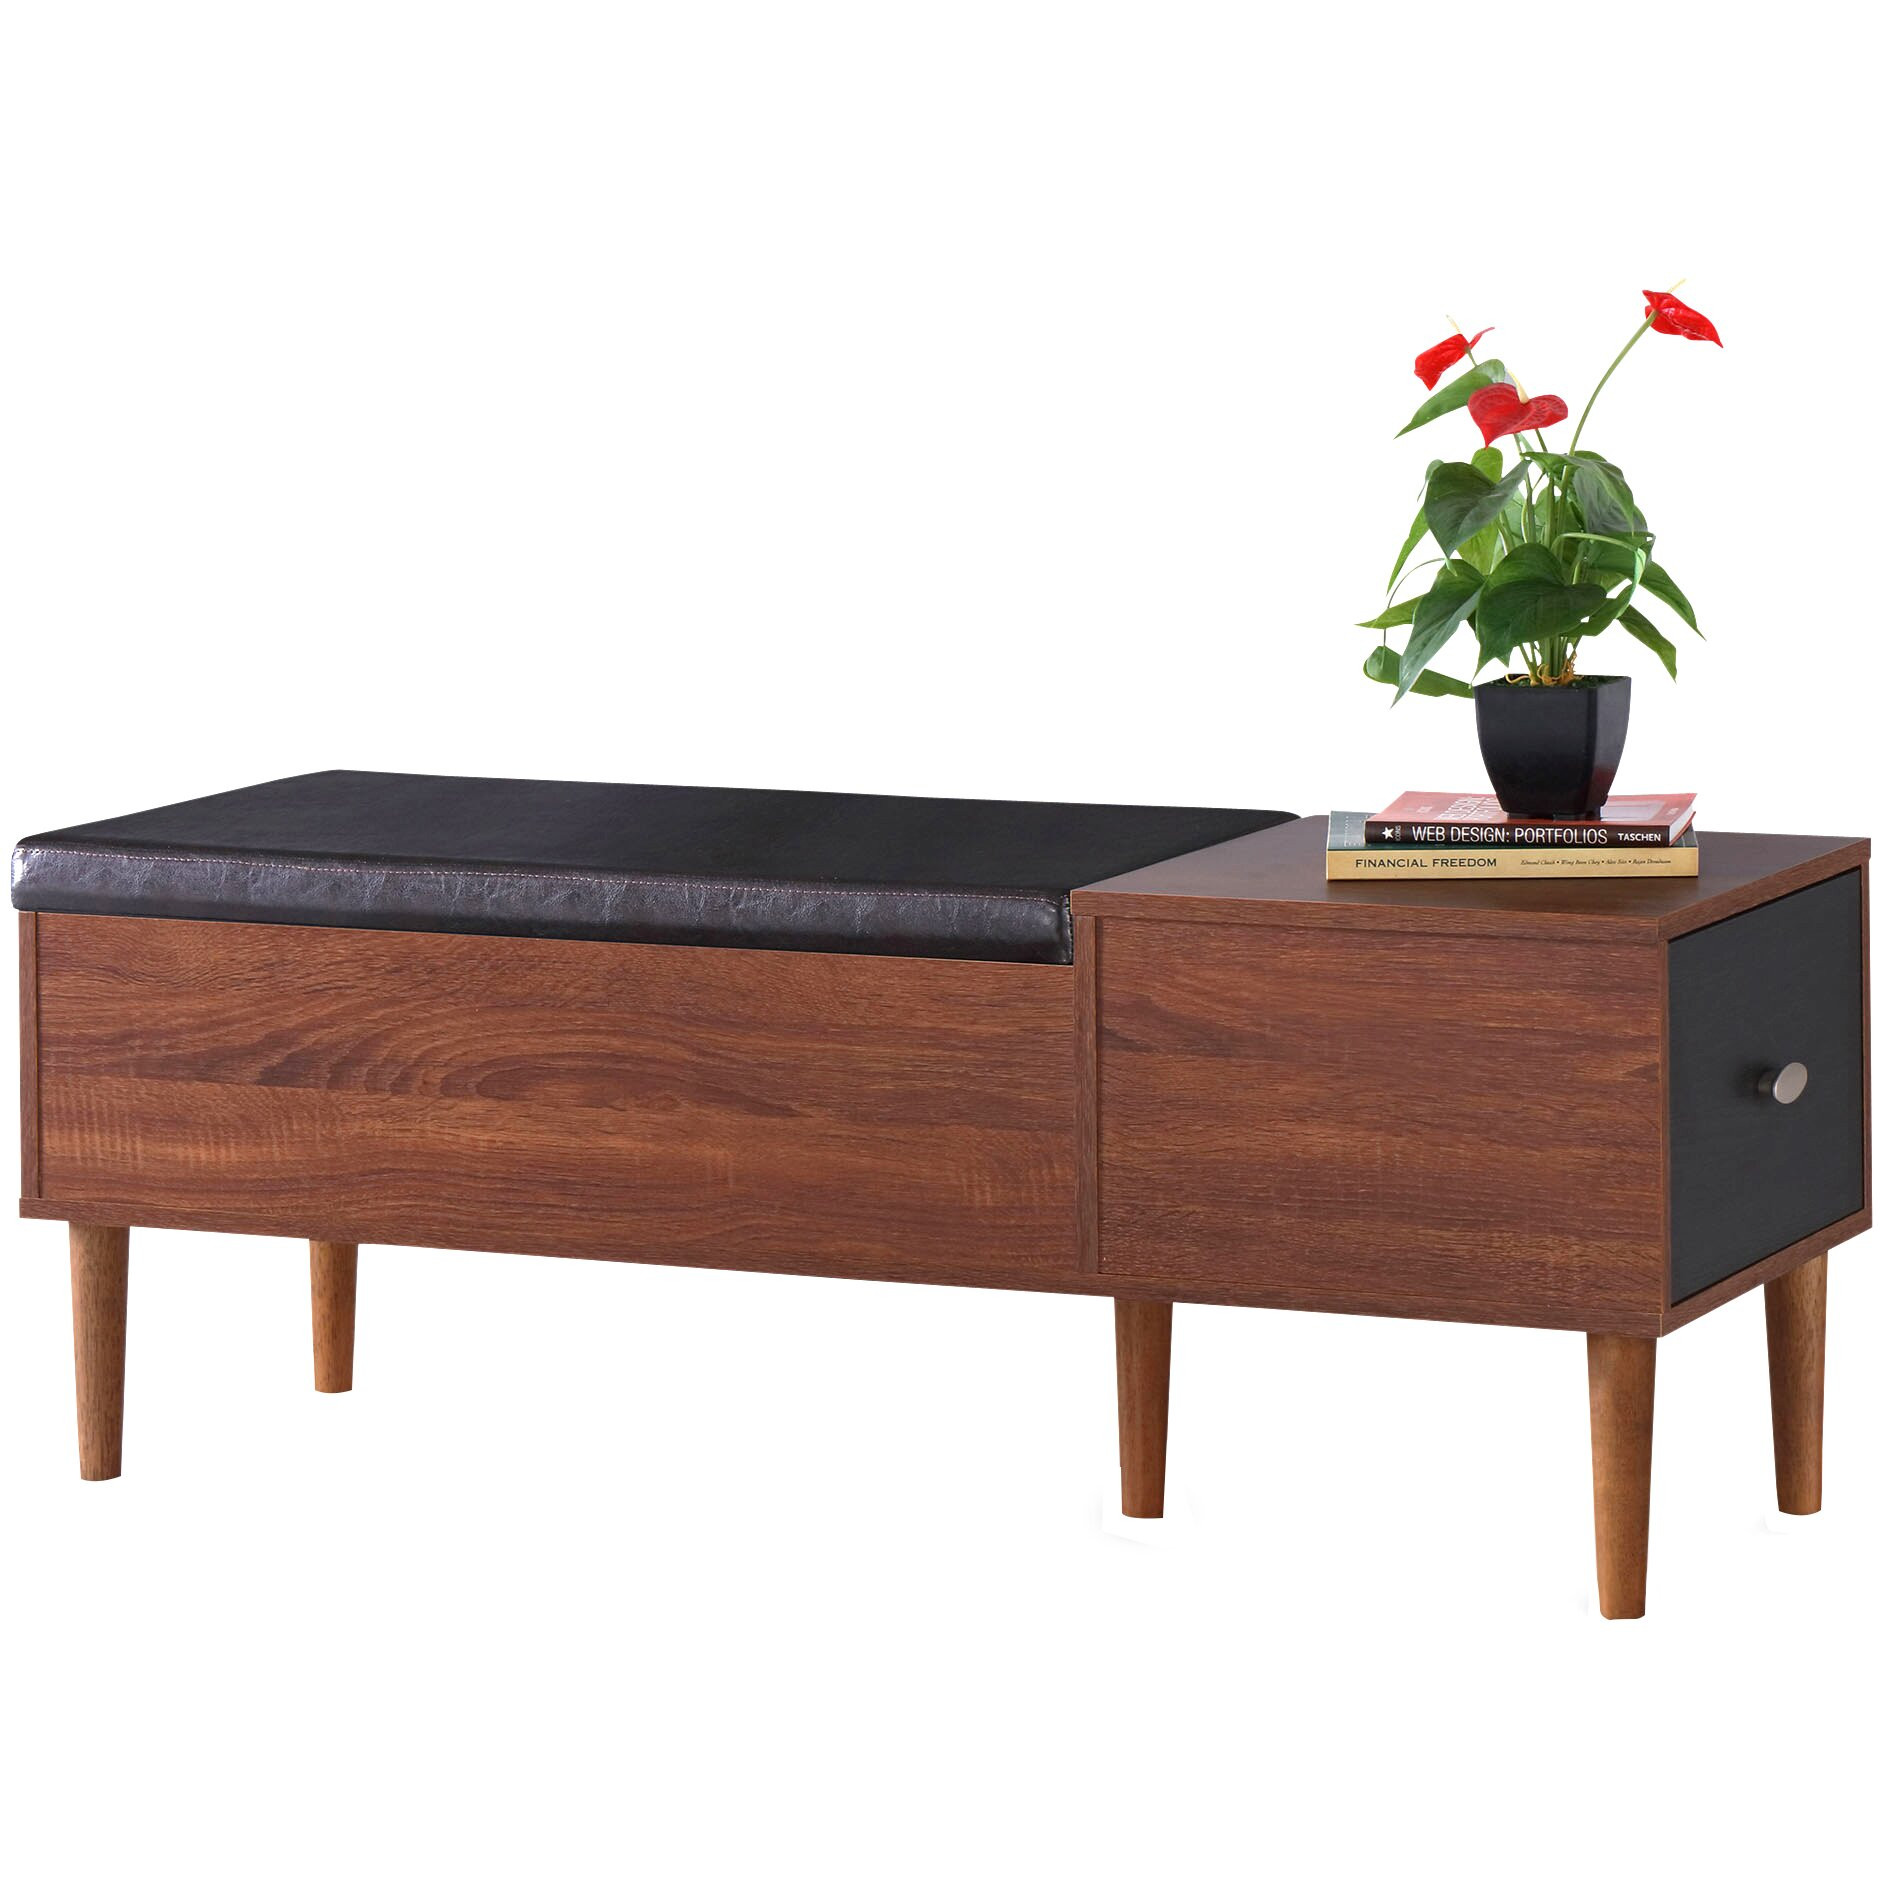 Modern Entryway Bench With Storage
 Wholesale Interiors Merrick Wood Storage Entryway Bench